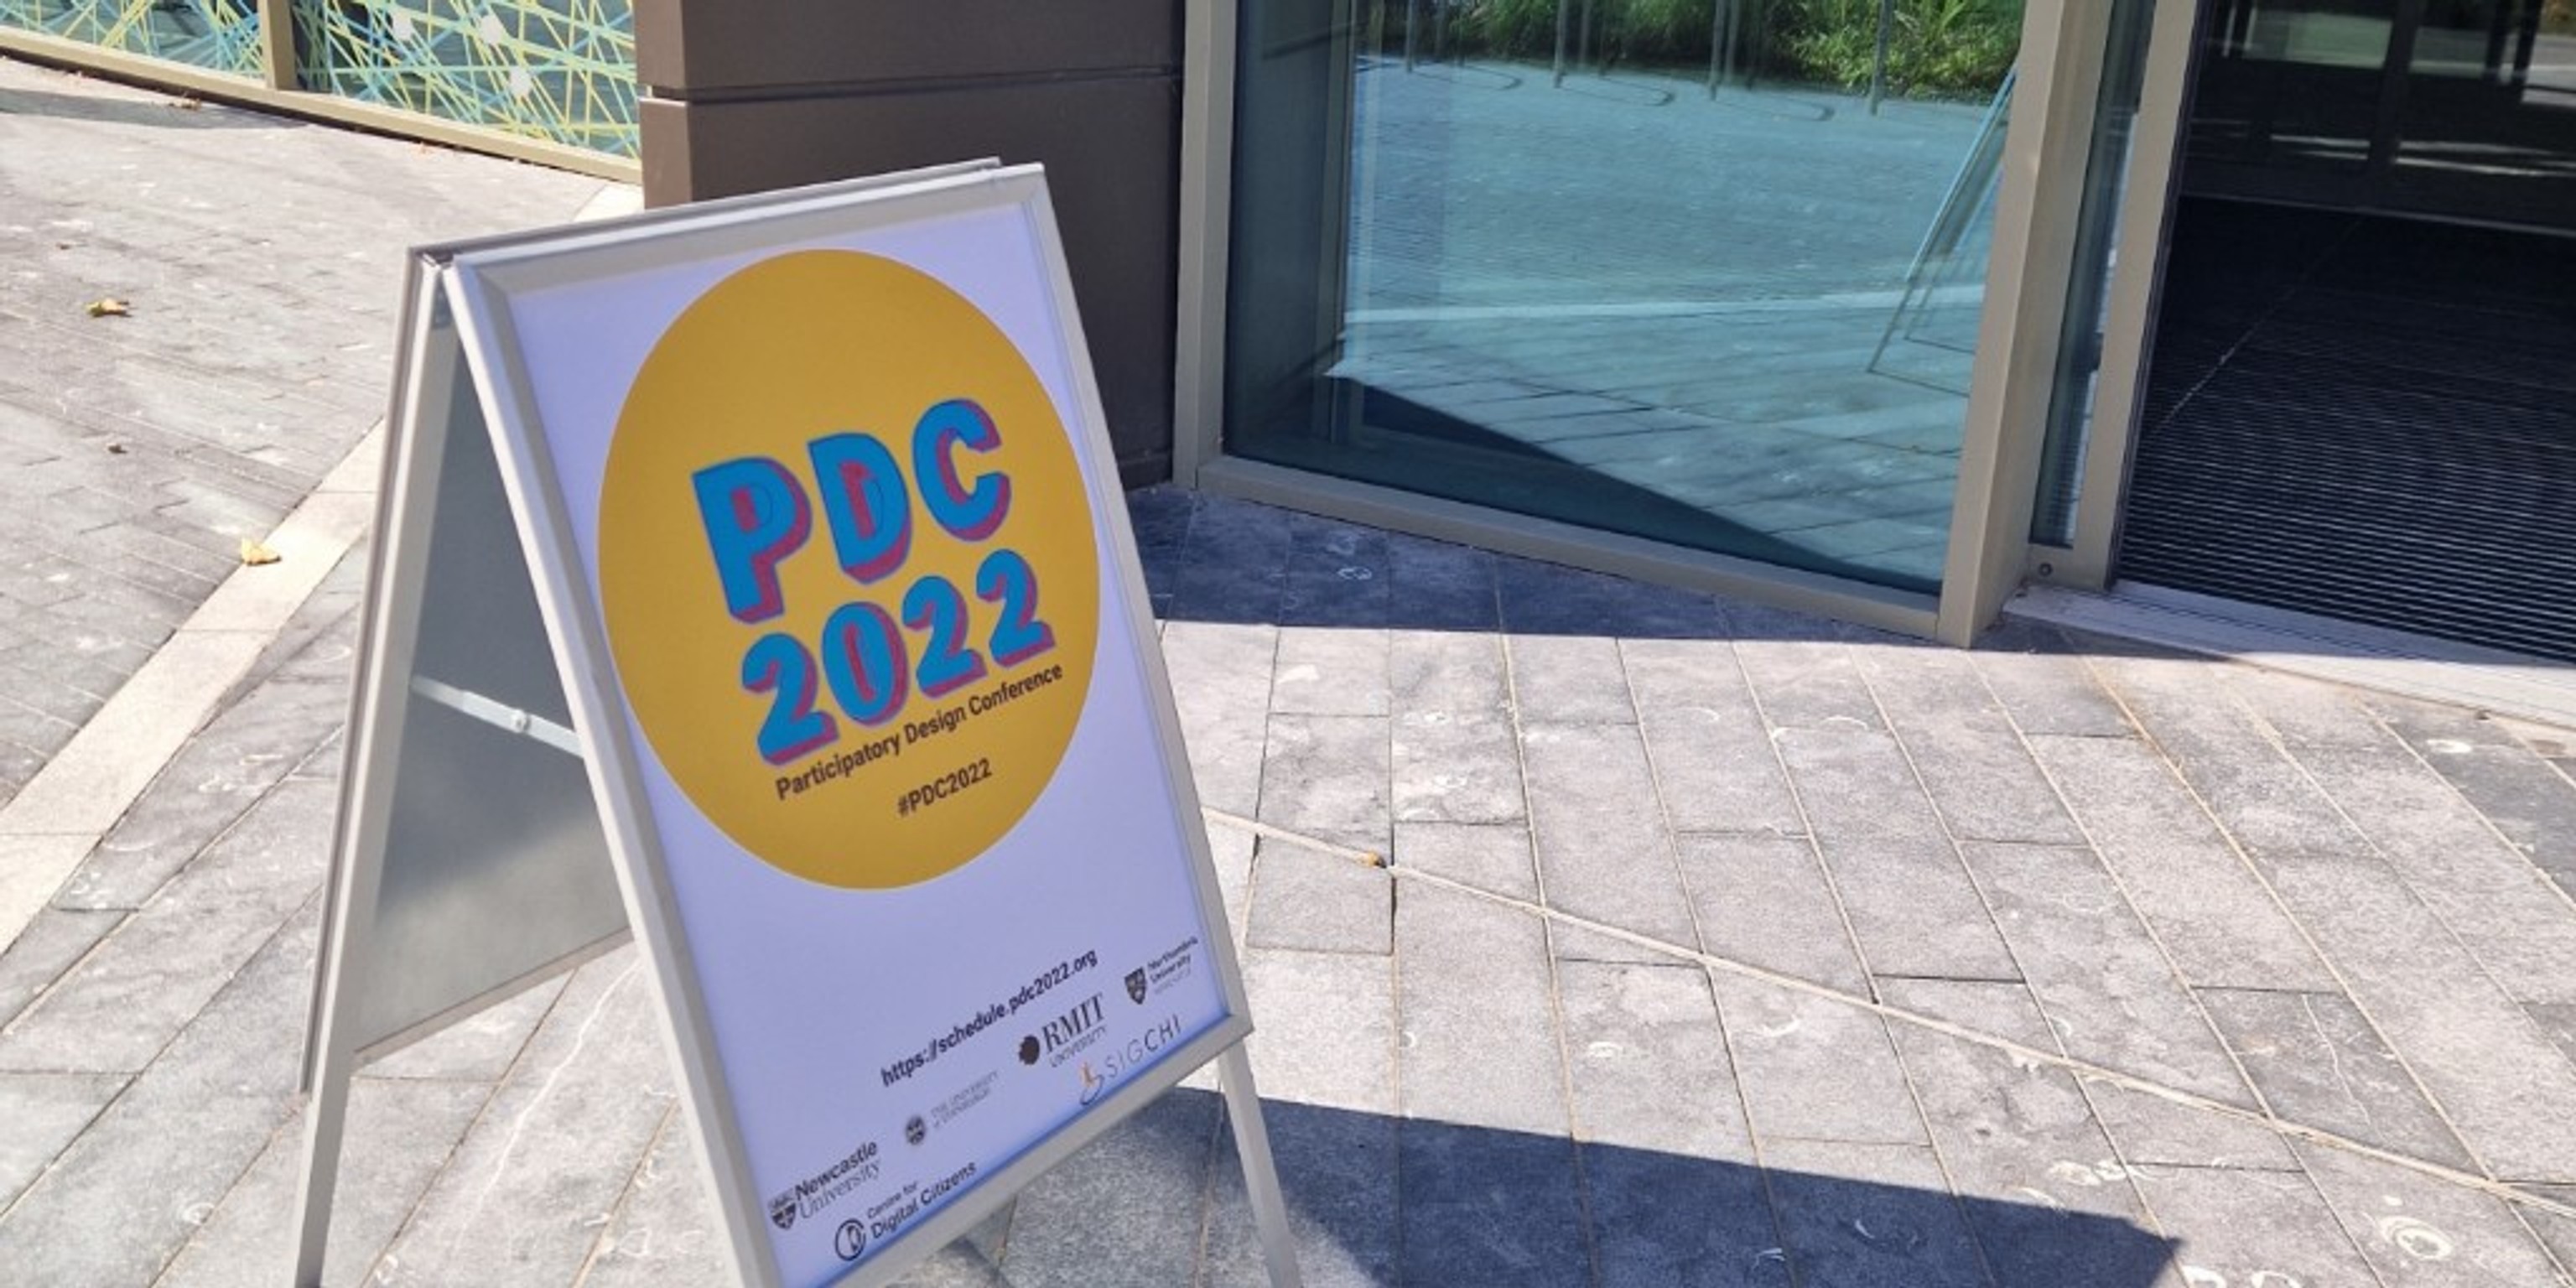 My internship experience: Being an Online Conference Content Creator at Open Lab for PDC2022